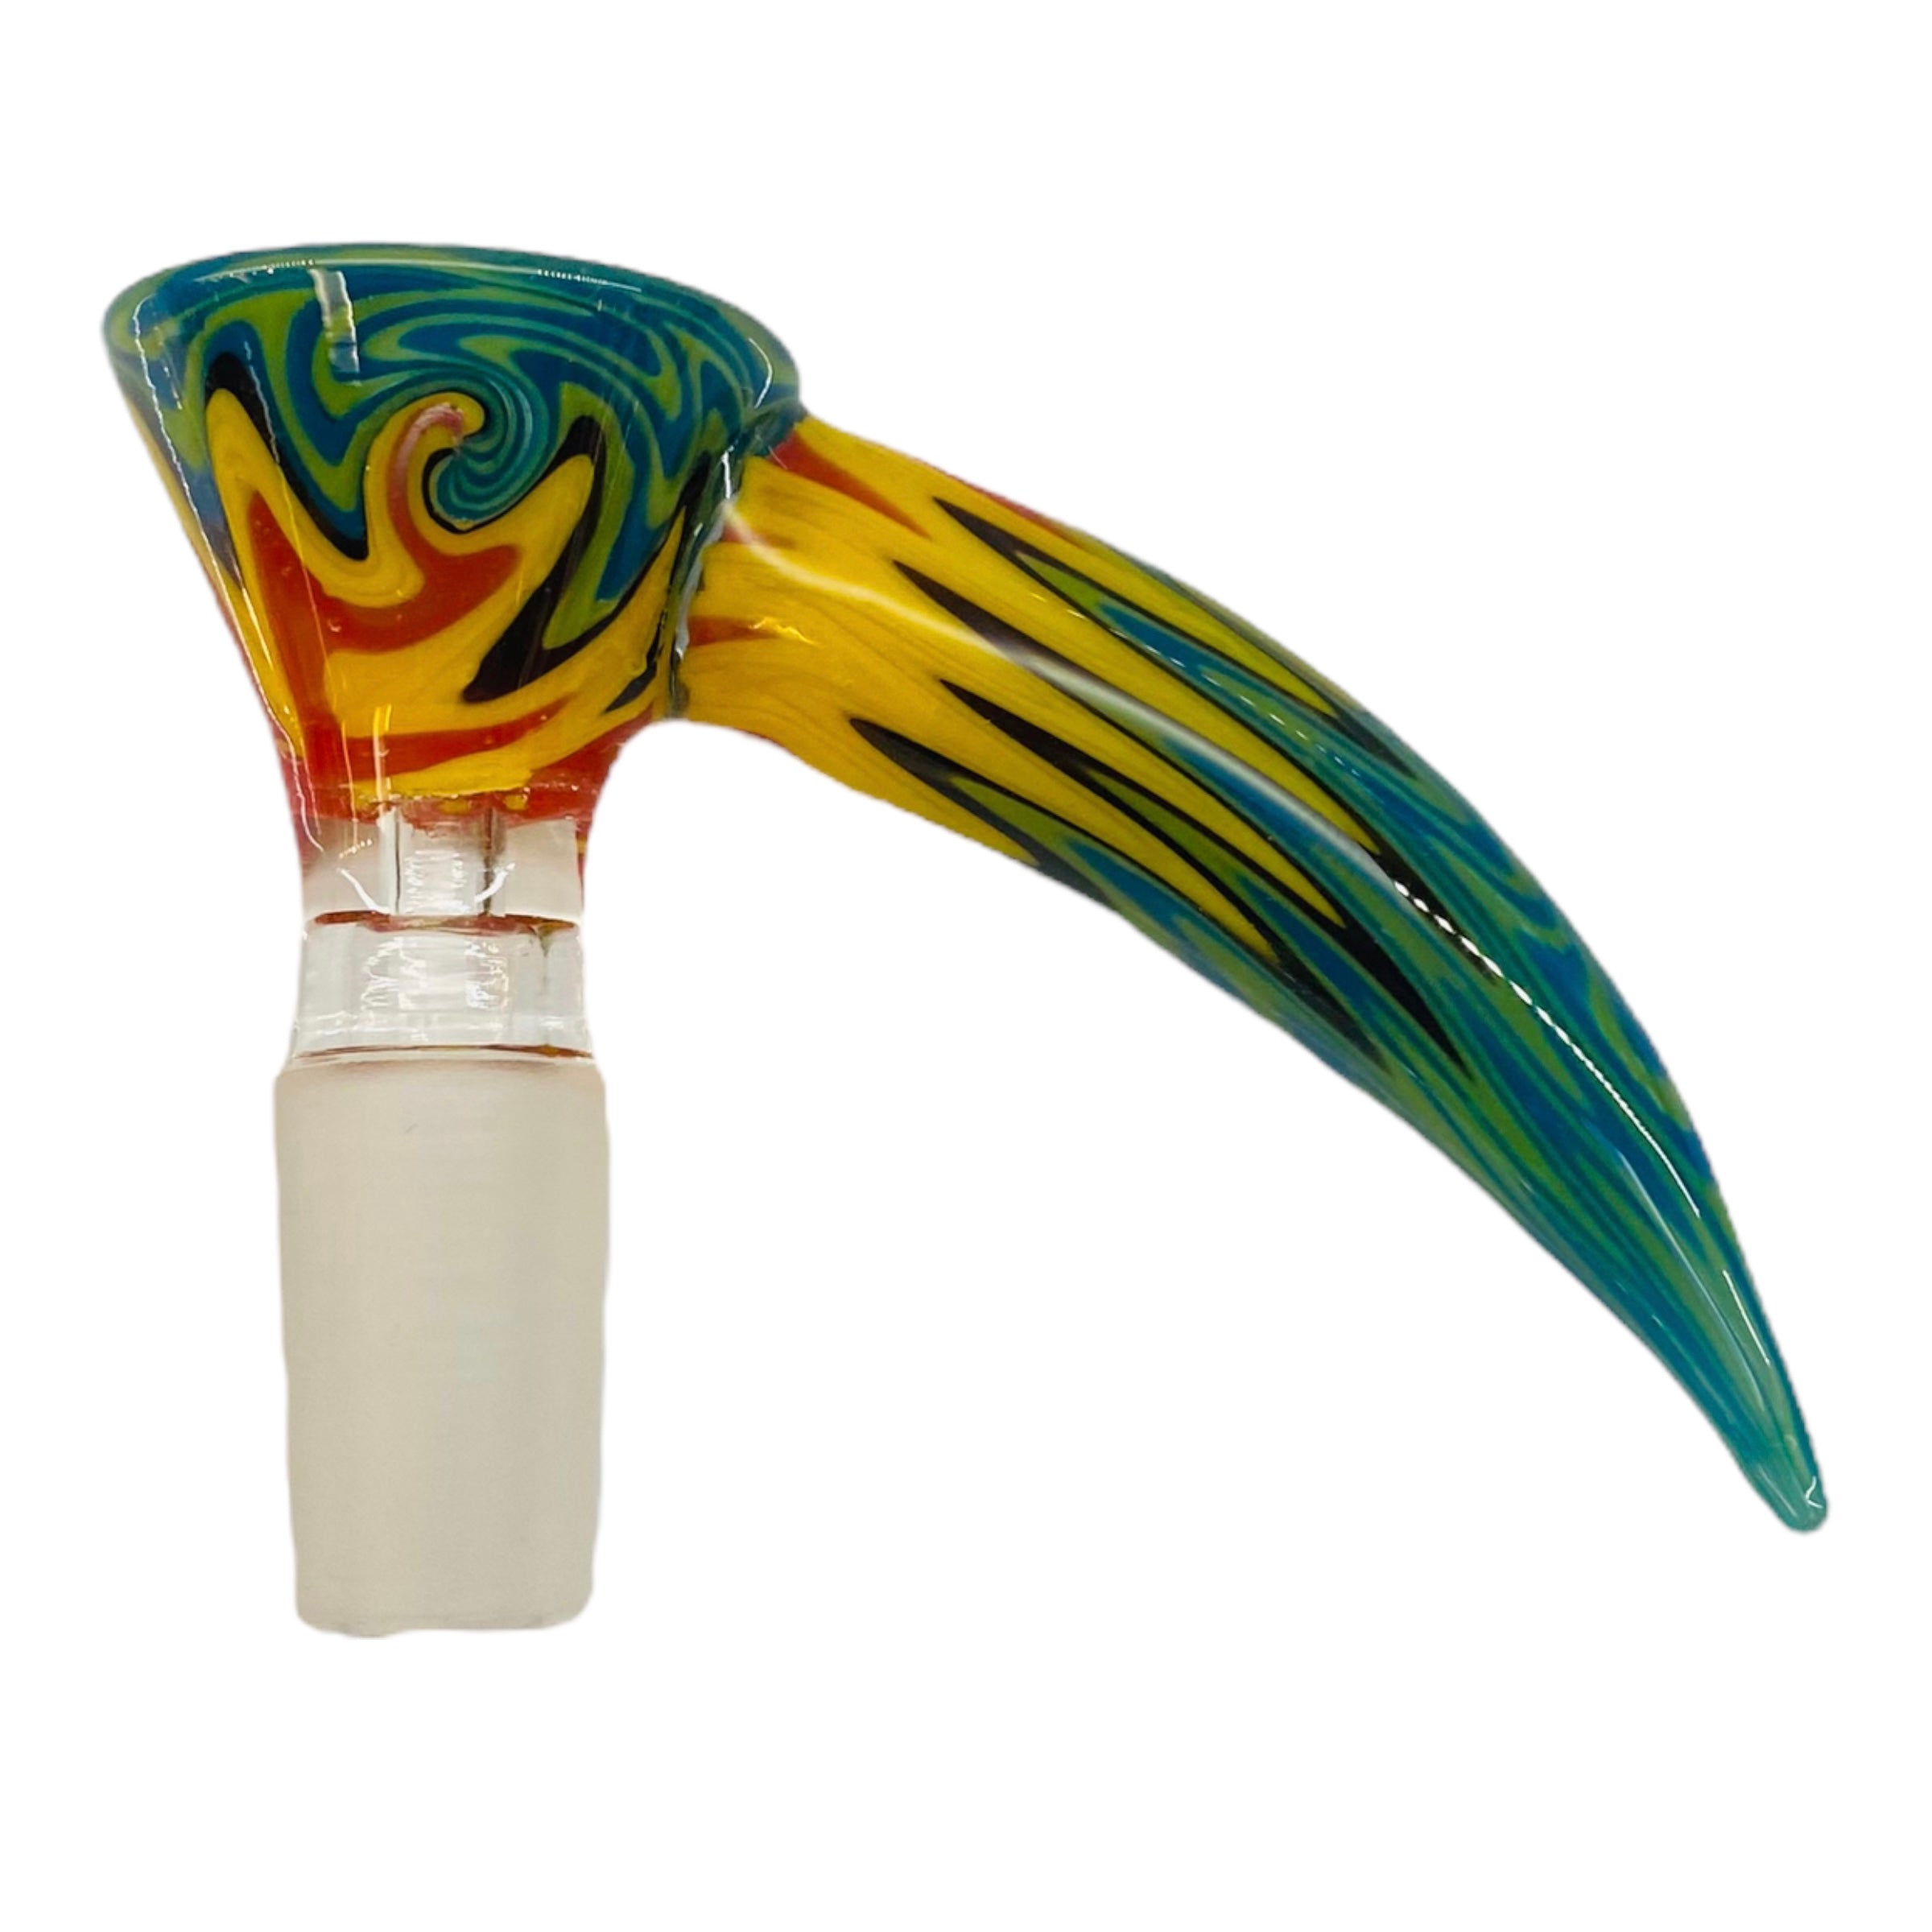 14mm Flower Bowls - Large Horn Martini Bong Bowl Piece With Color Wig Wag - Rasta Swirl